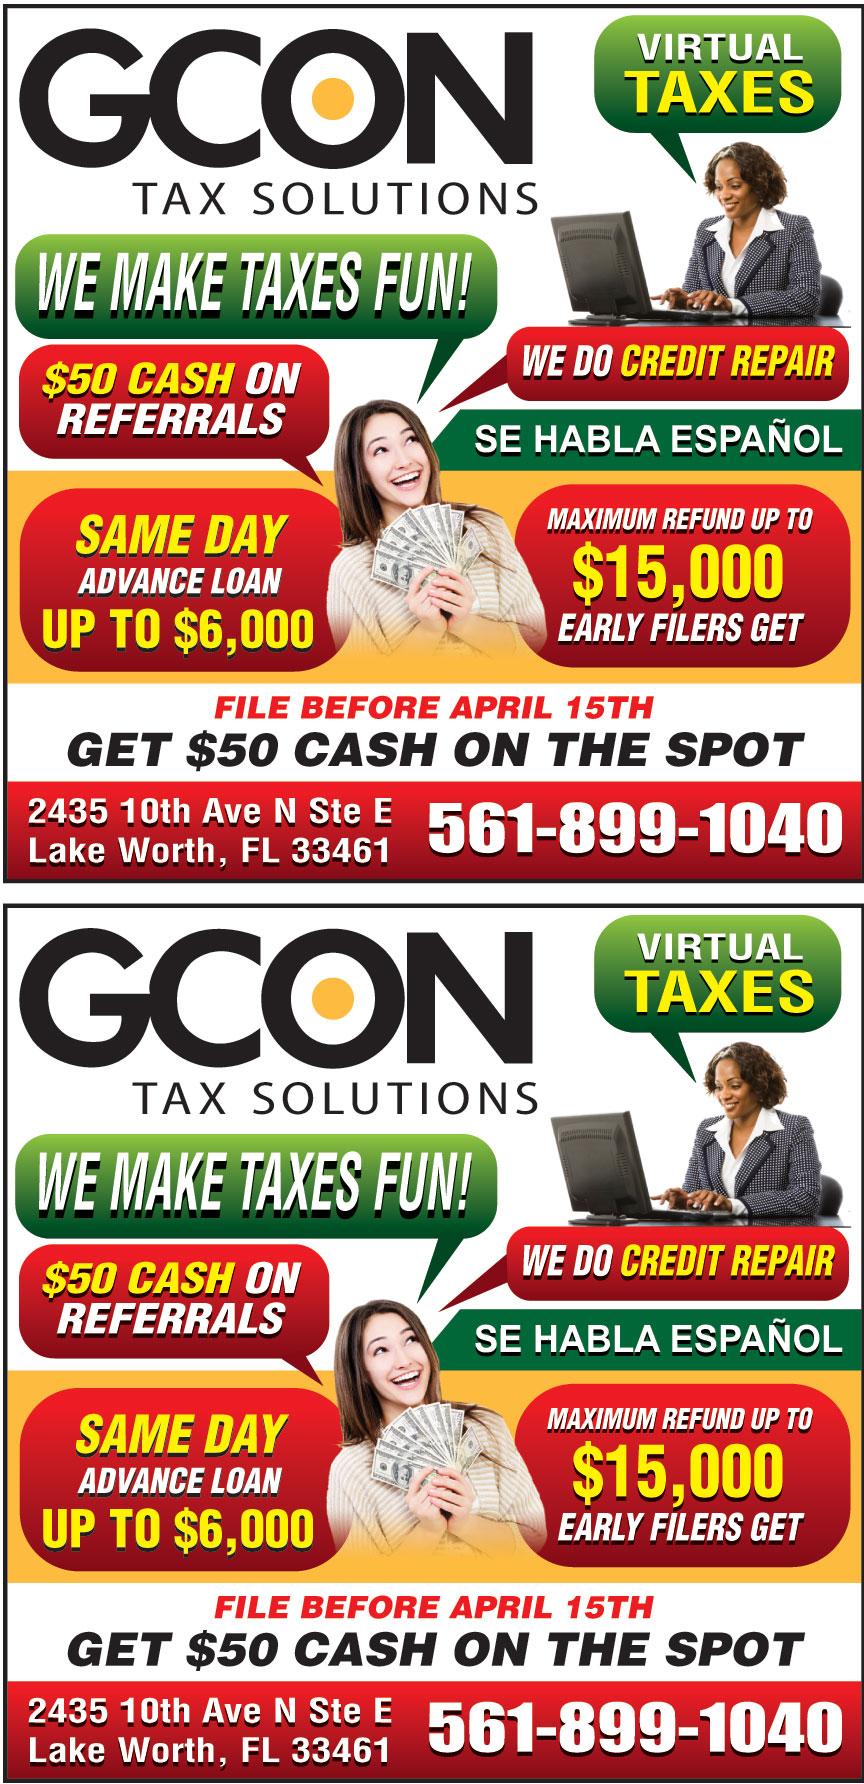 G CON TAX SOLUTIONS